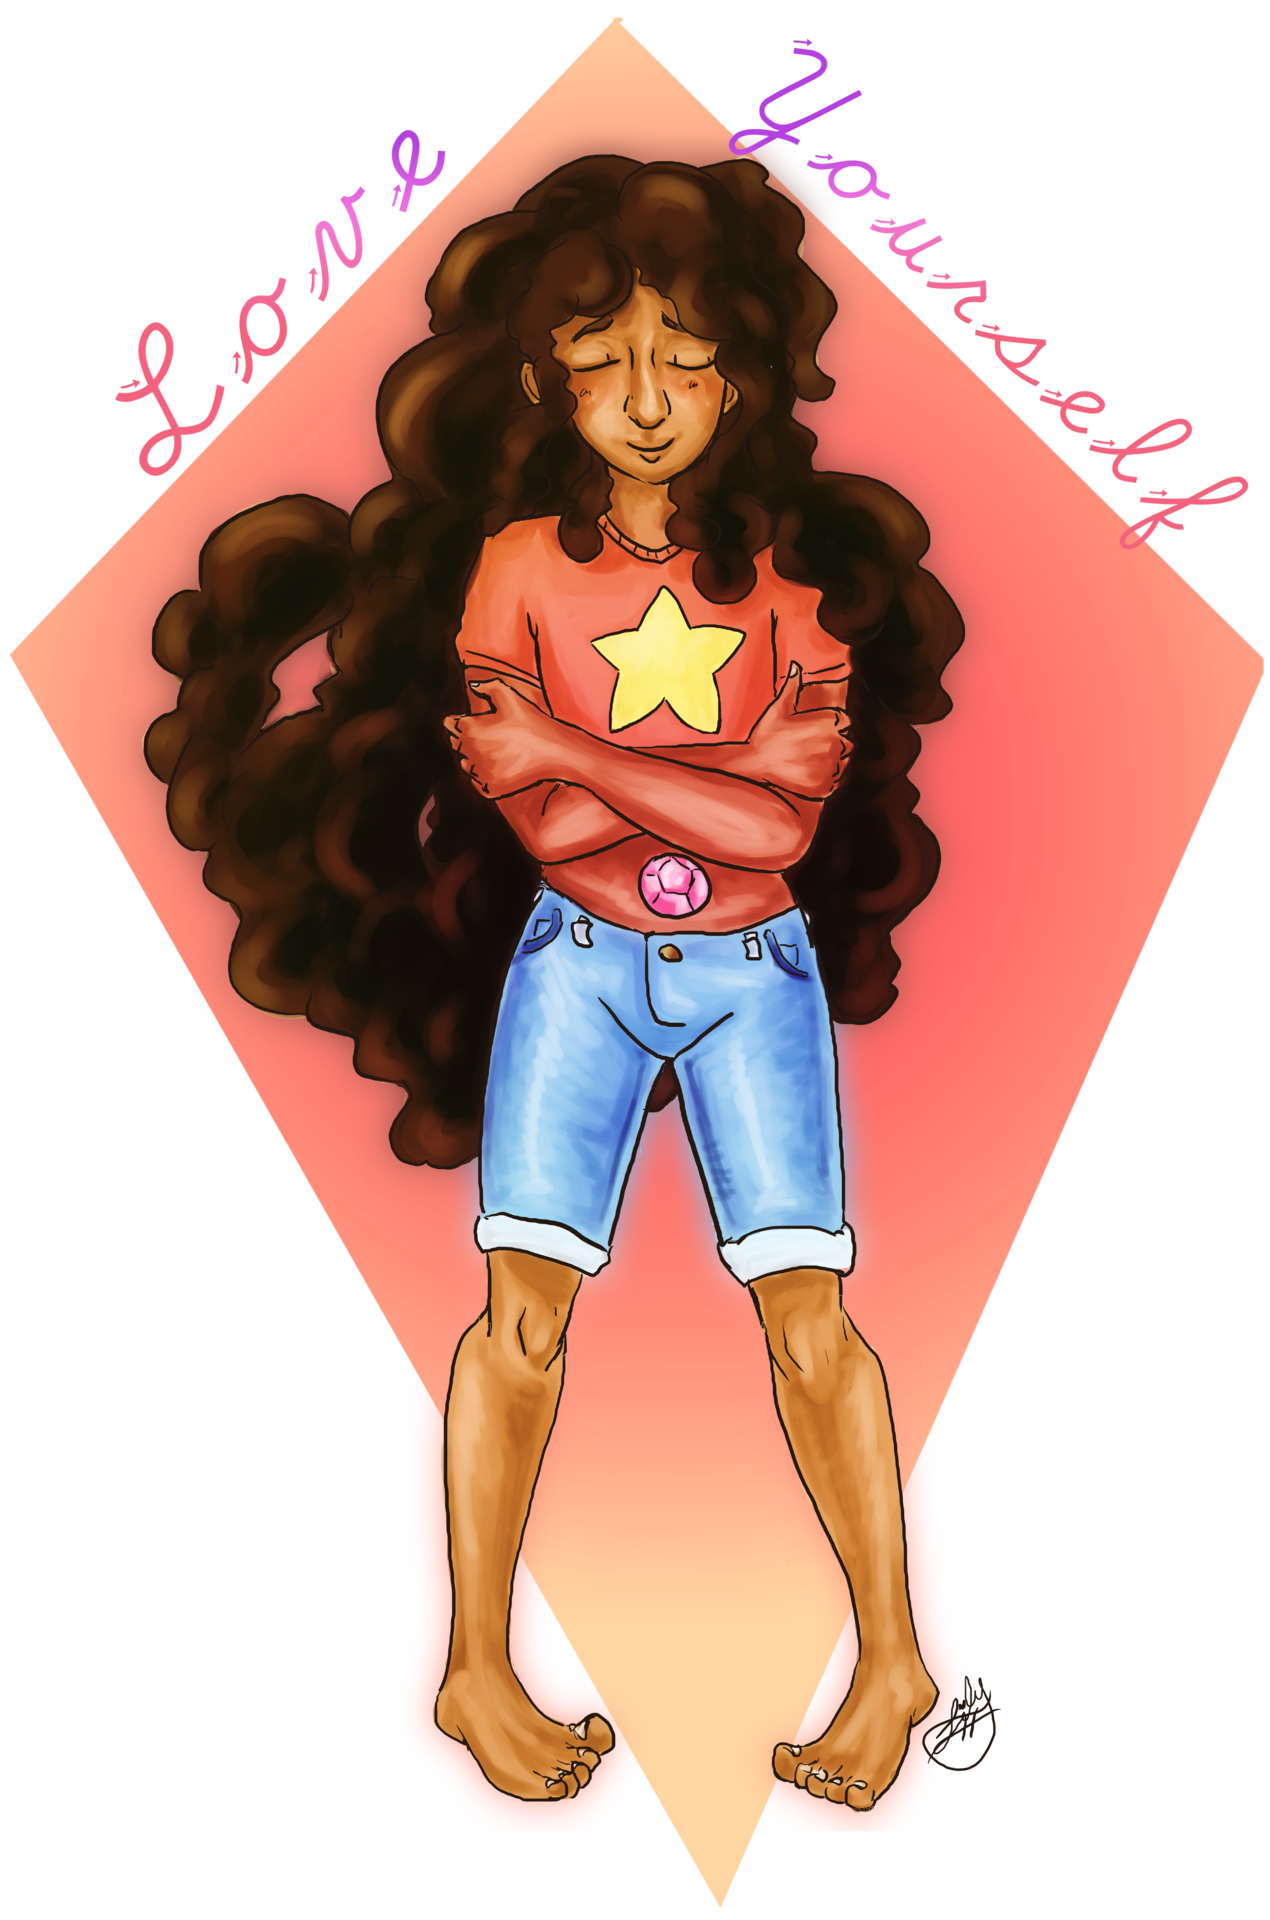 Just a little something I made of my favorite fusion to remind myself that loving yourself is important.